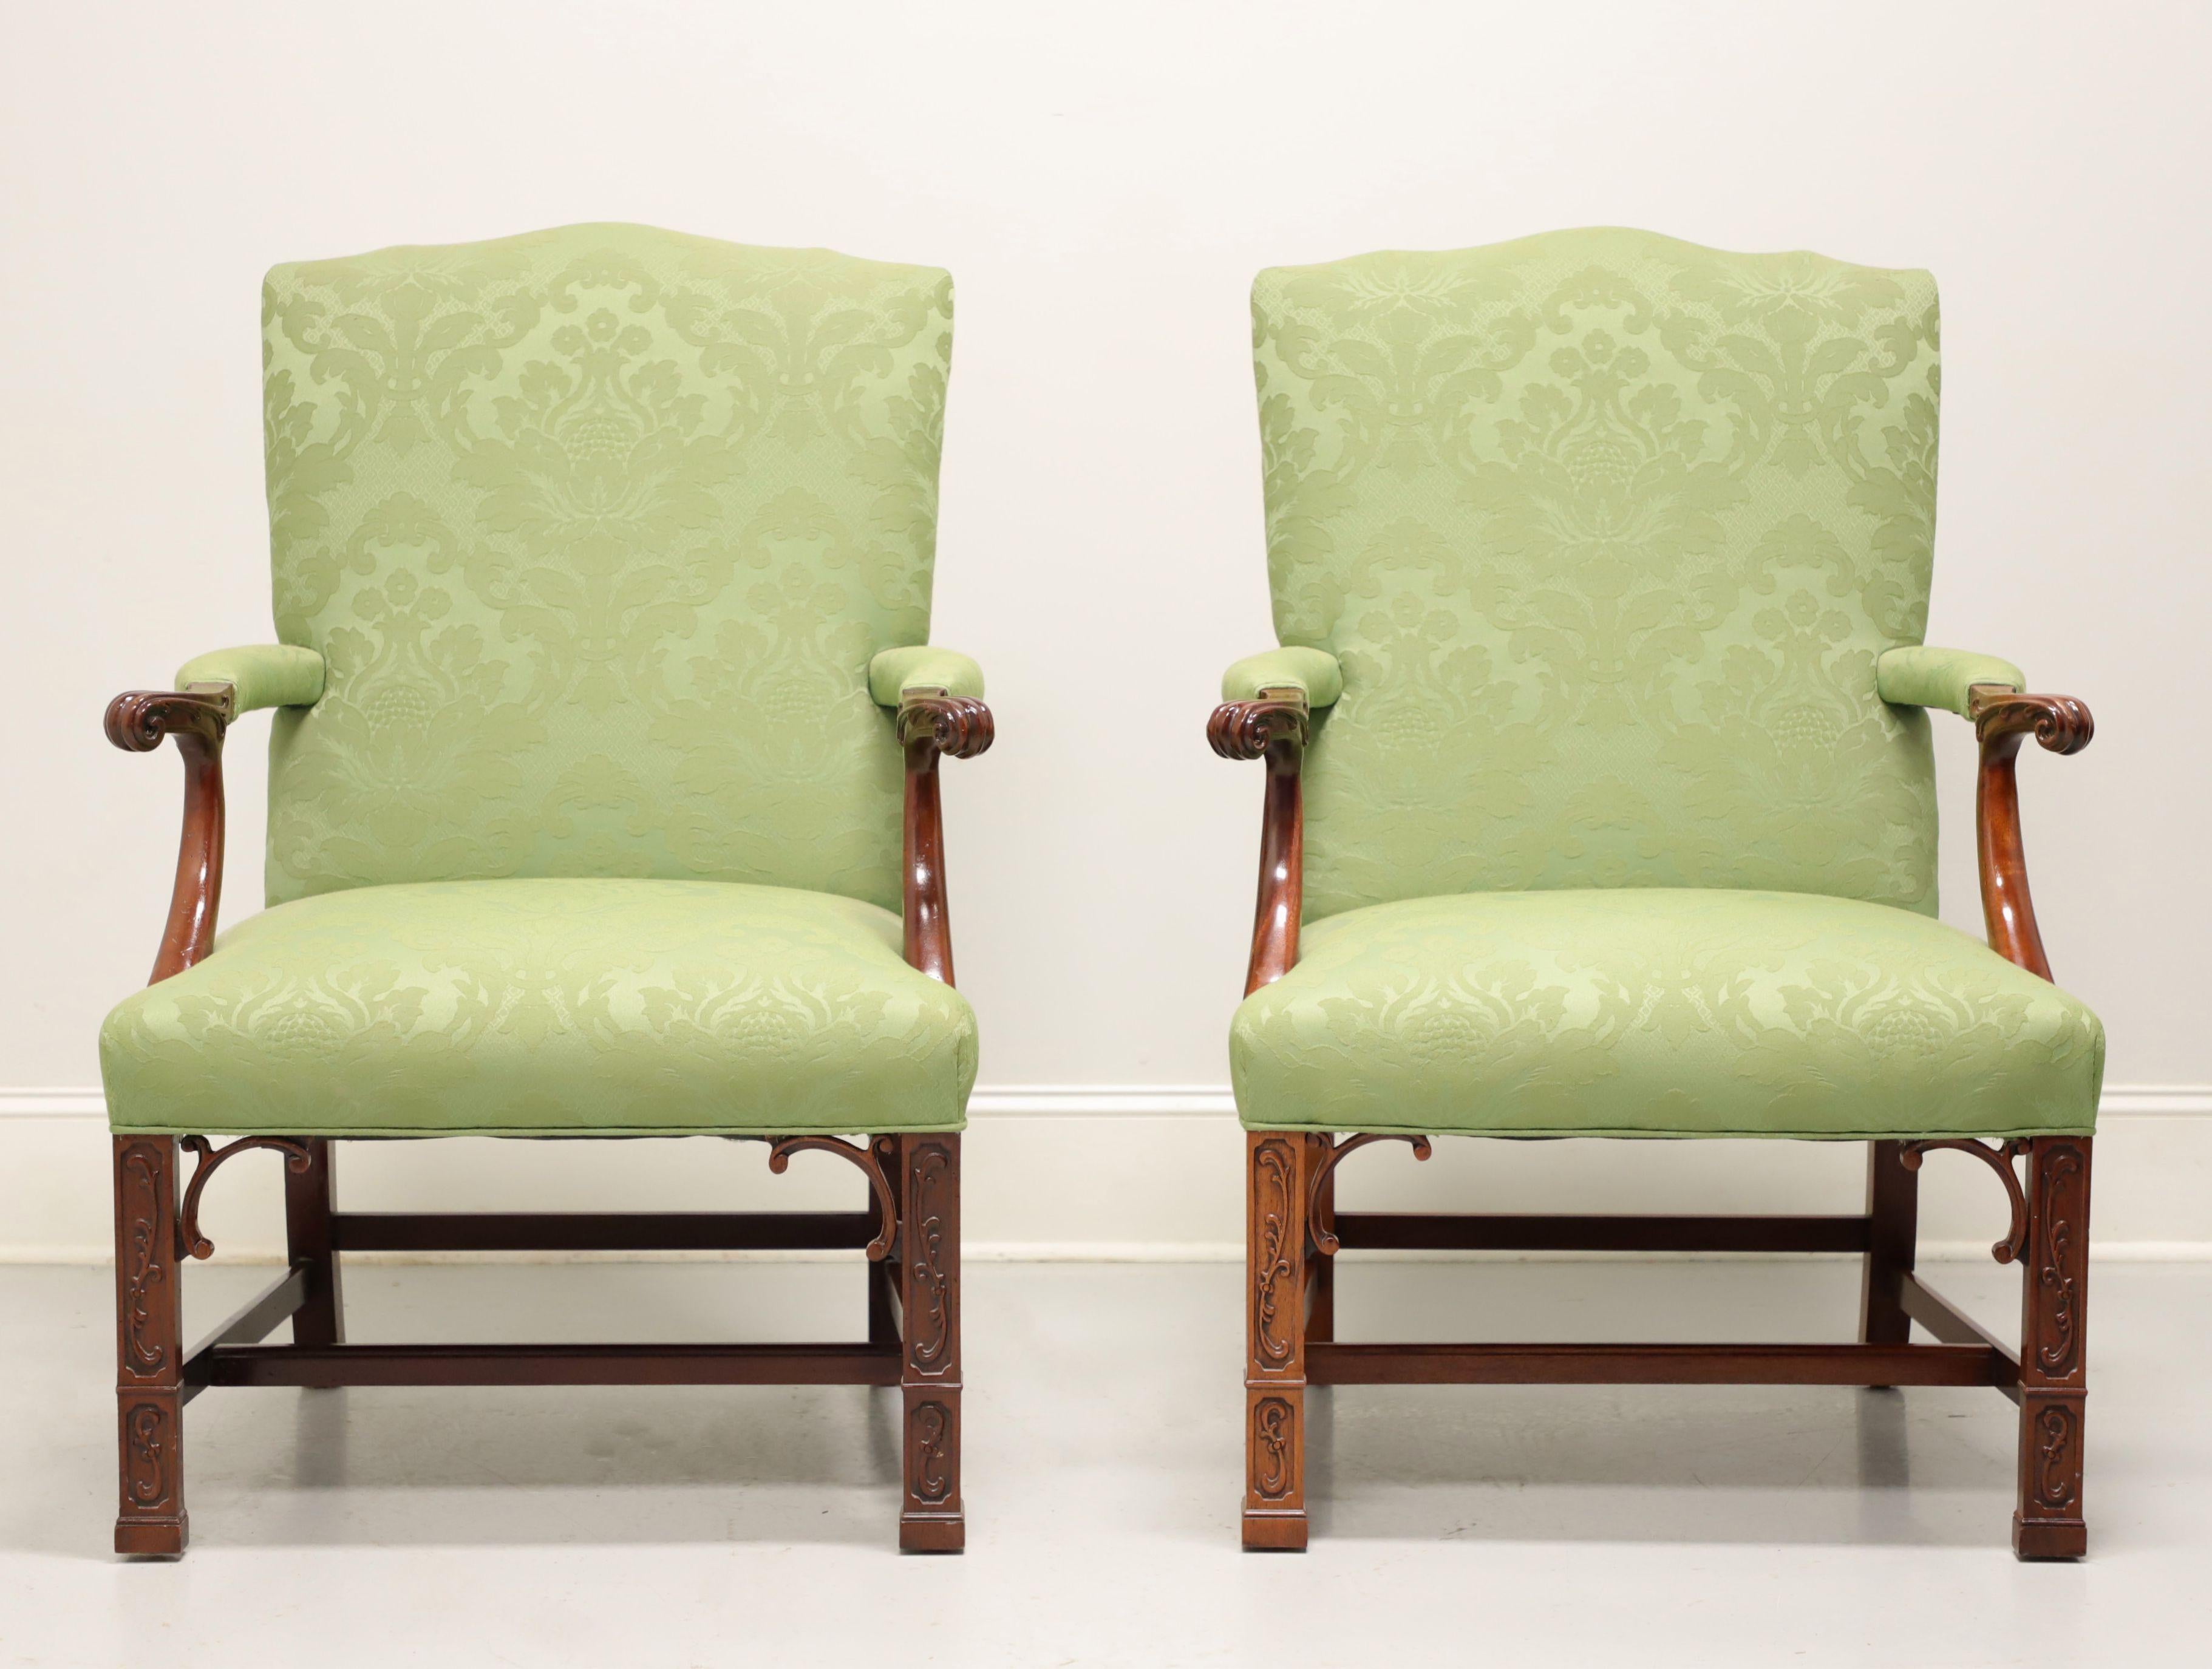 American SOUTHWOOD Gainsborough Mahogany Chippendale Style Fretwork Armchairs - Pair For Sale